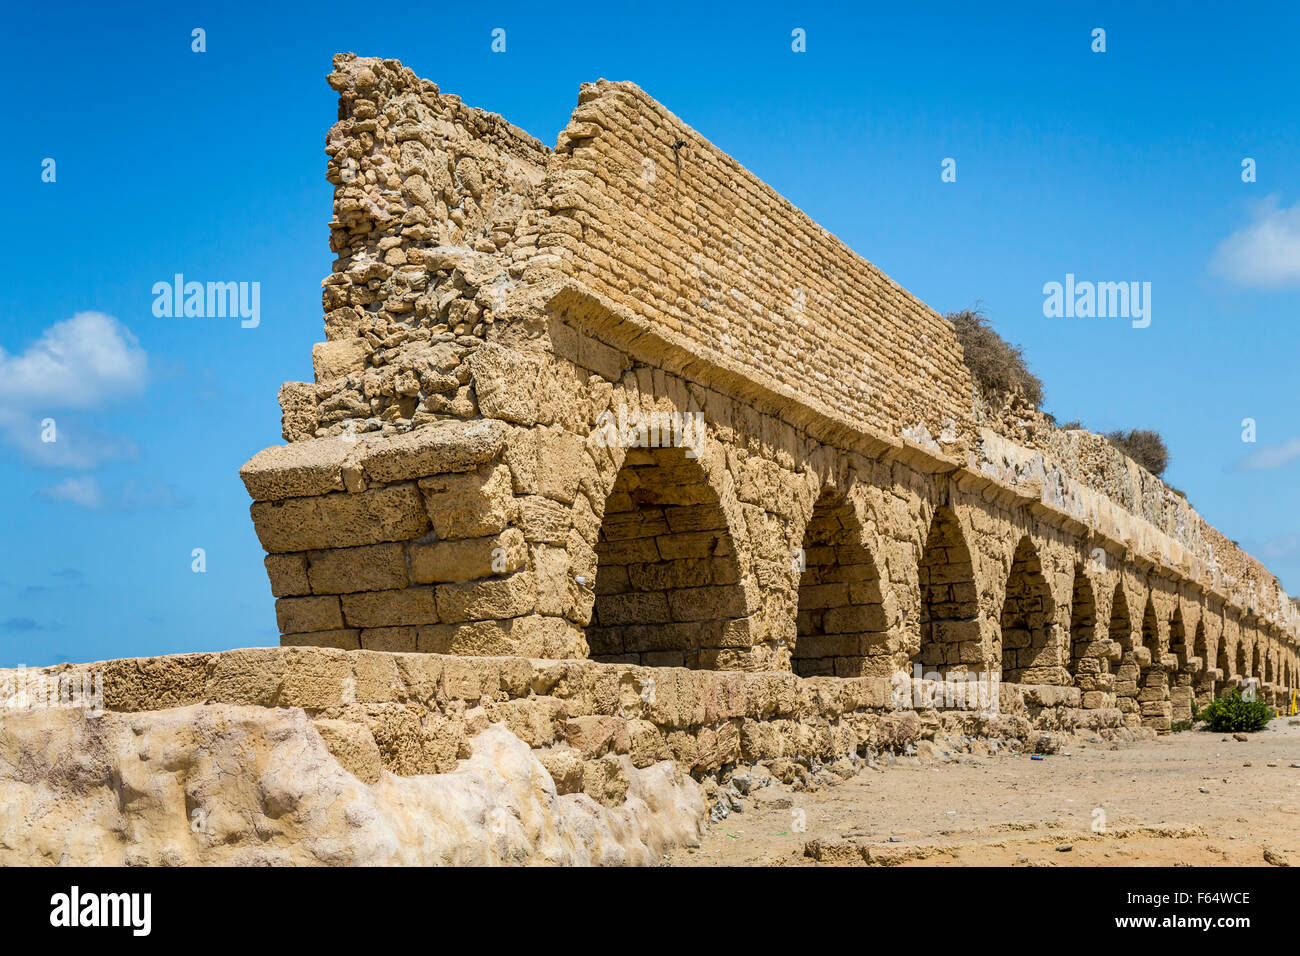 The remains of a Roman aqueduct near the historical city of Caesarea, Israel, Middle East. Stock Photo